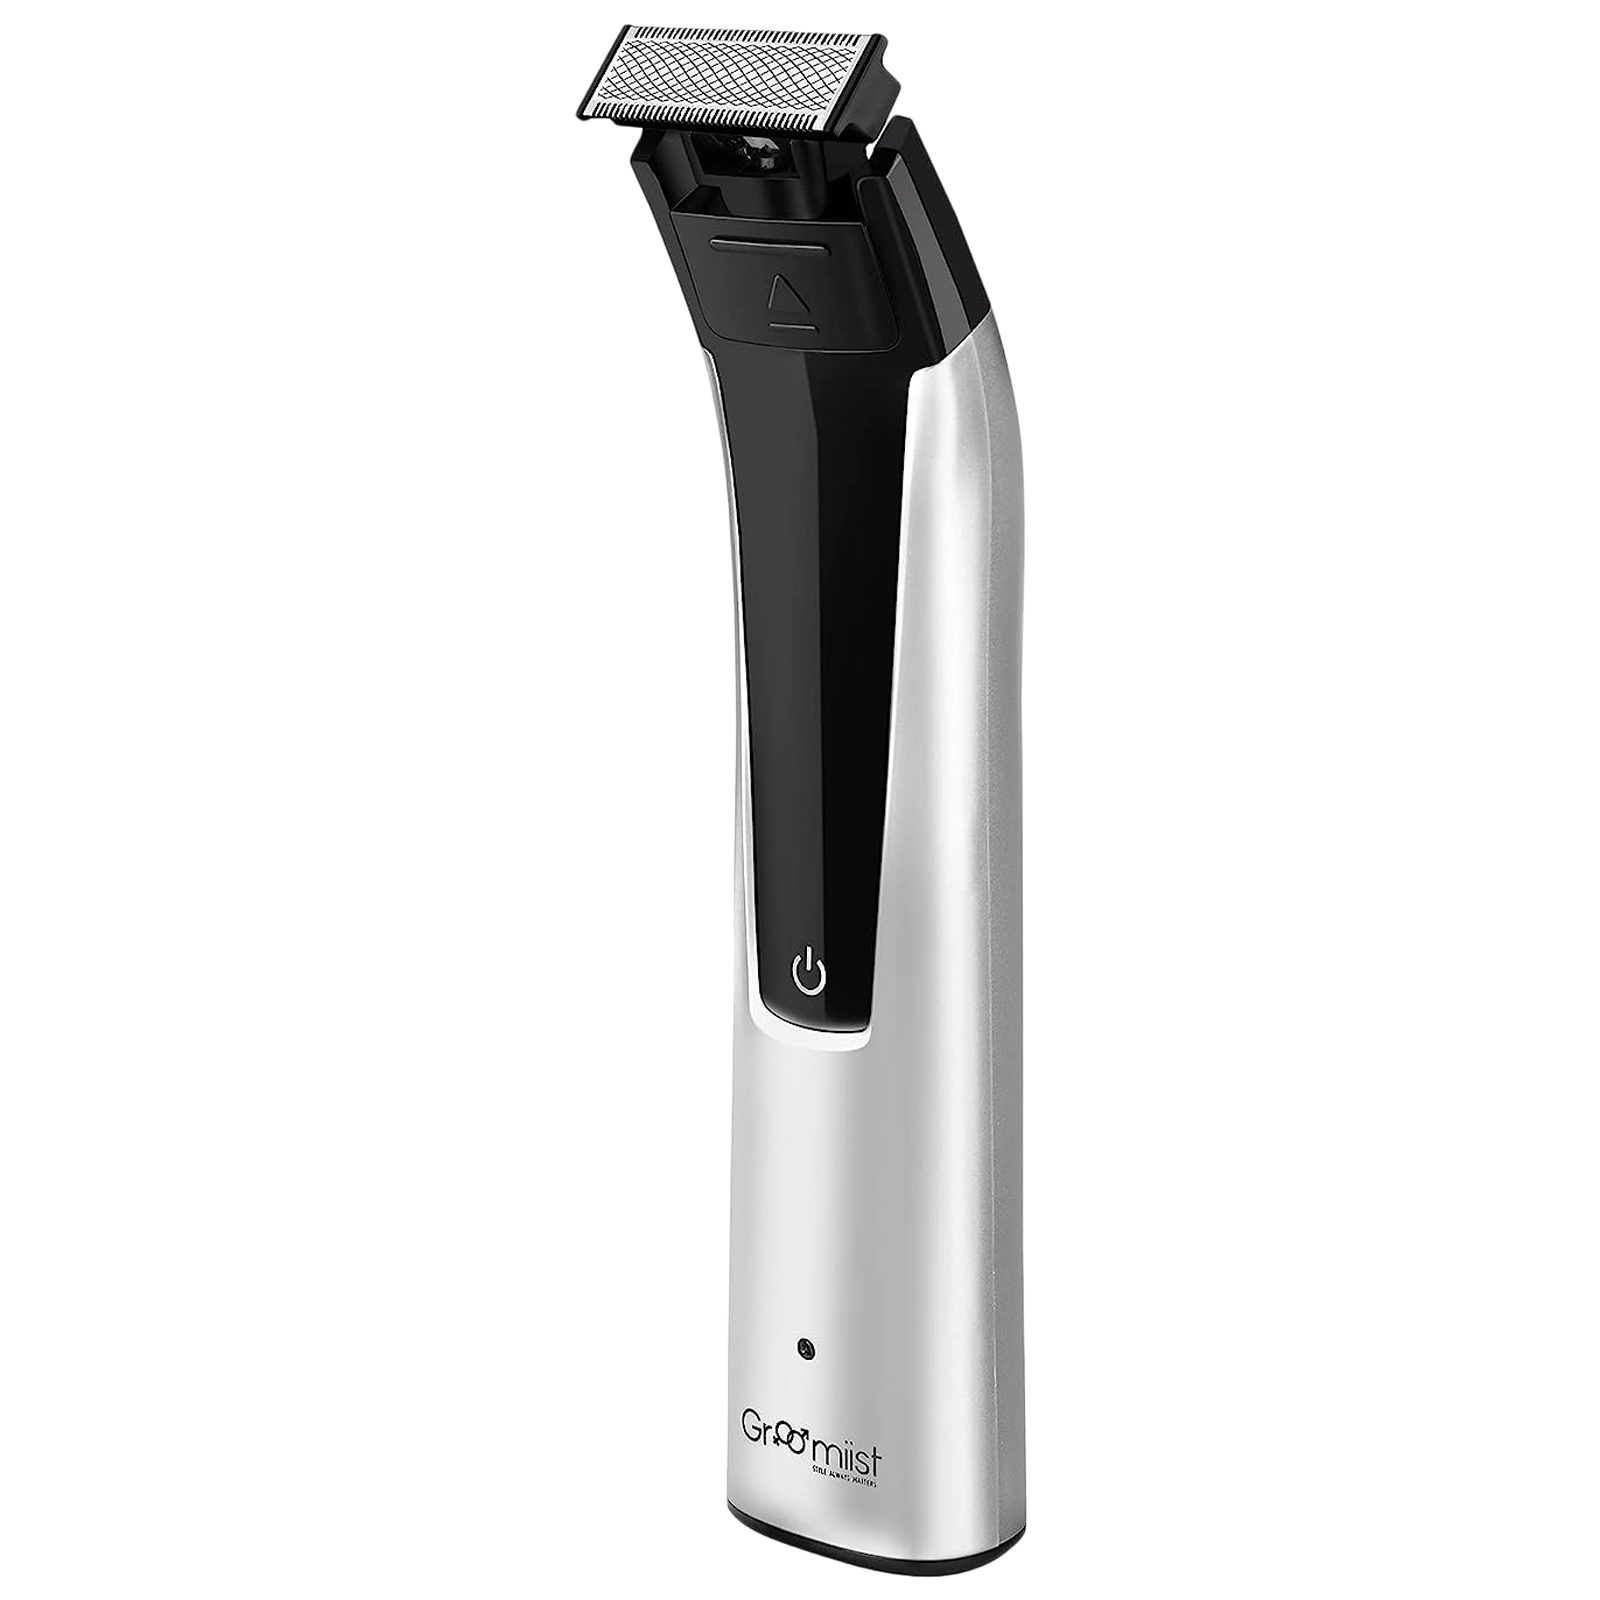 Groomiist Stainless Steel Blade Cordless Trimmer (with Quick Charge, CS-1BXL, Silver and Black)